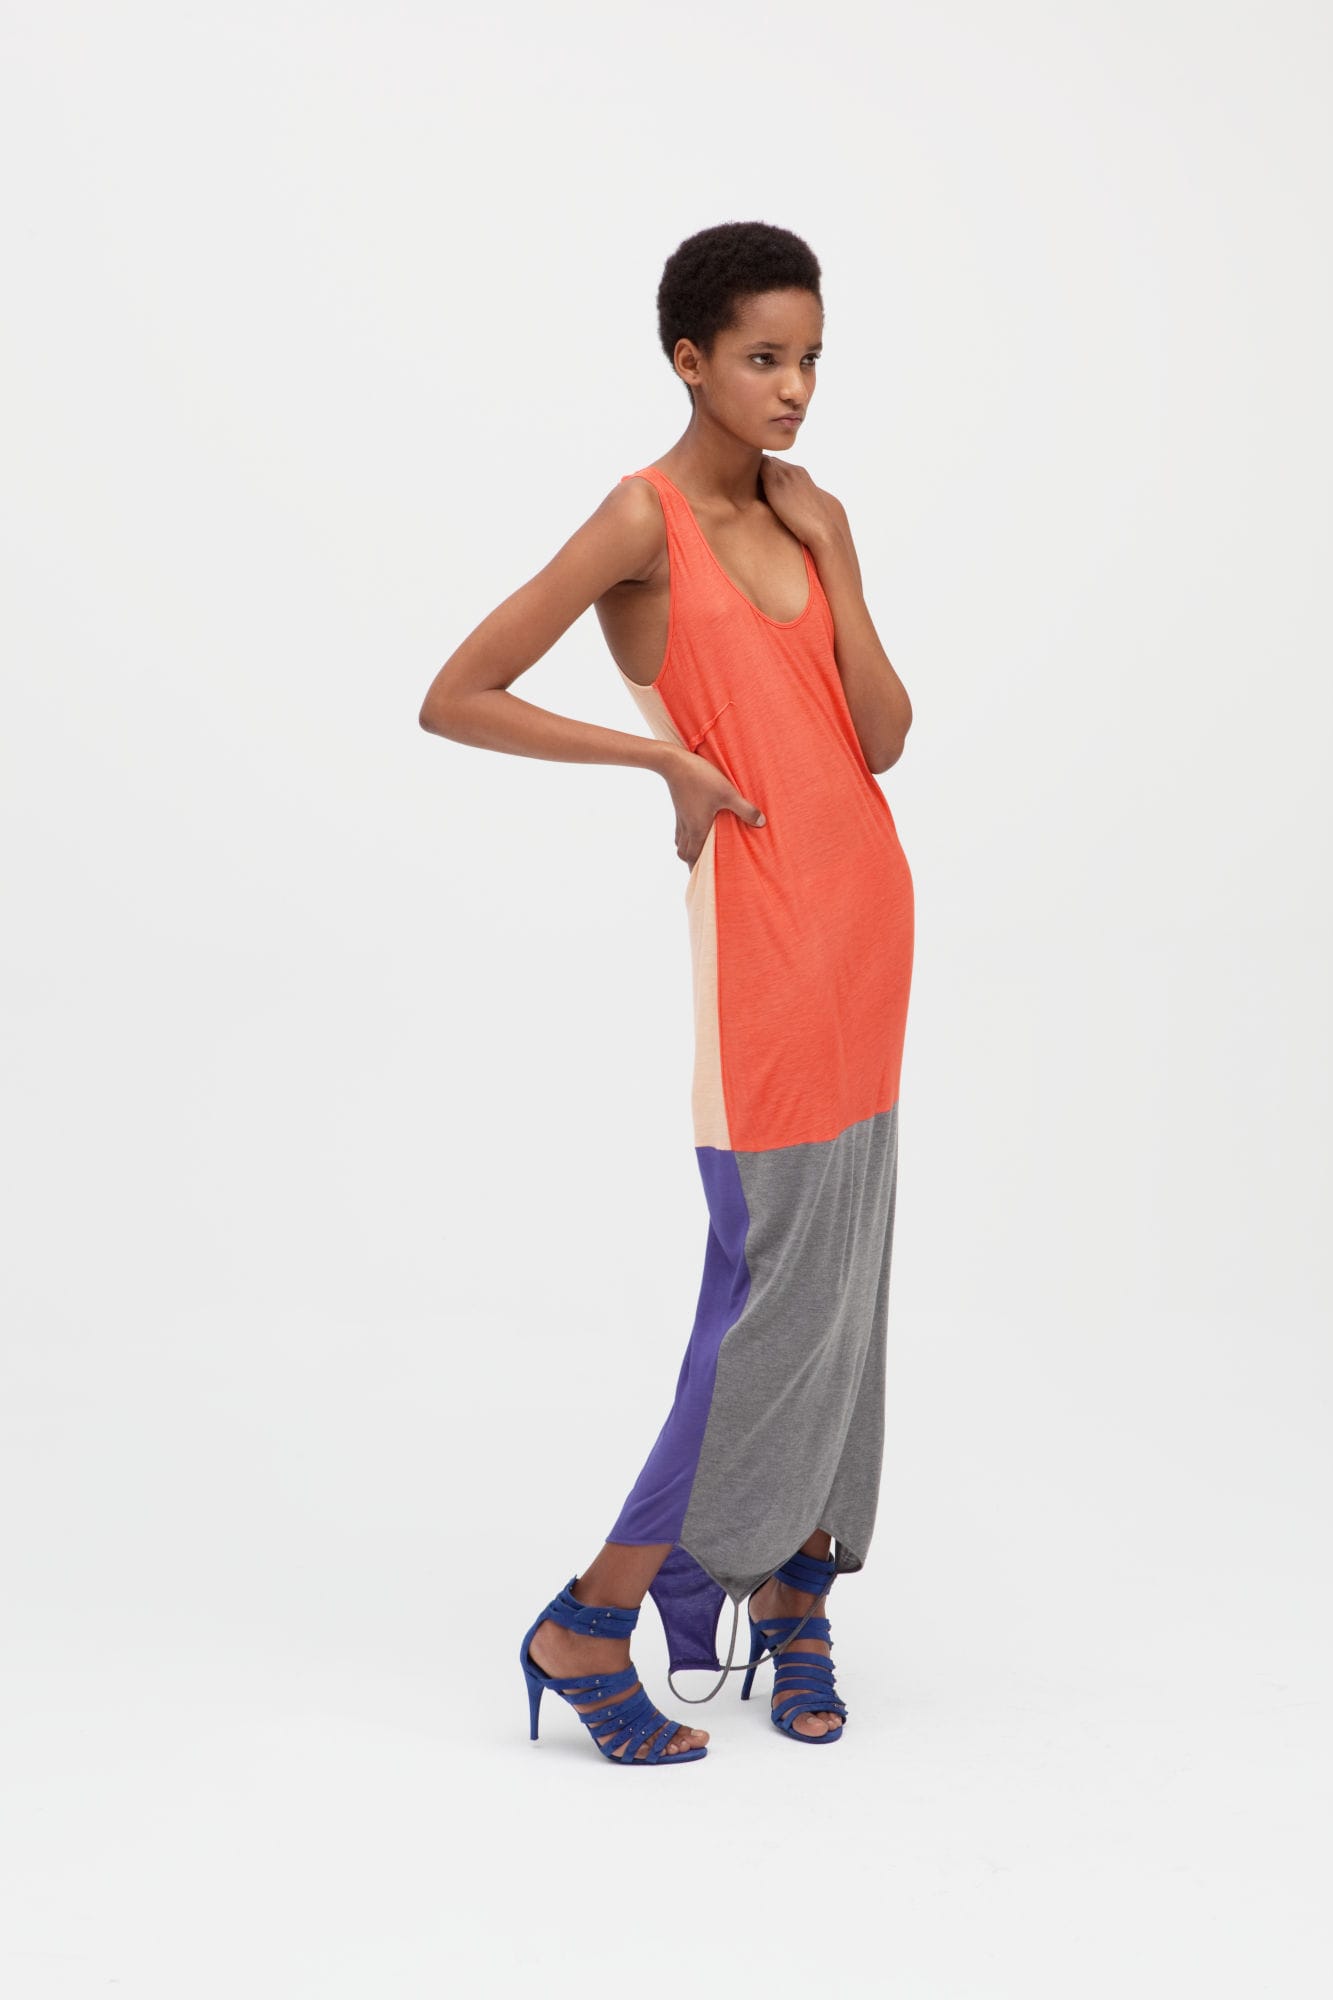 Woman wearing a long invertible dress made of 4 panels in orange, gray, purle, and beige.